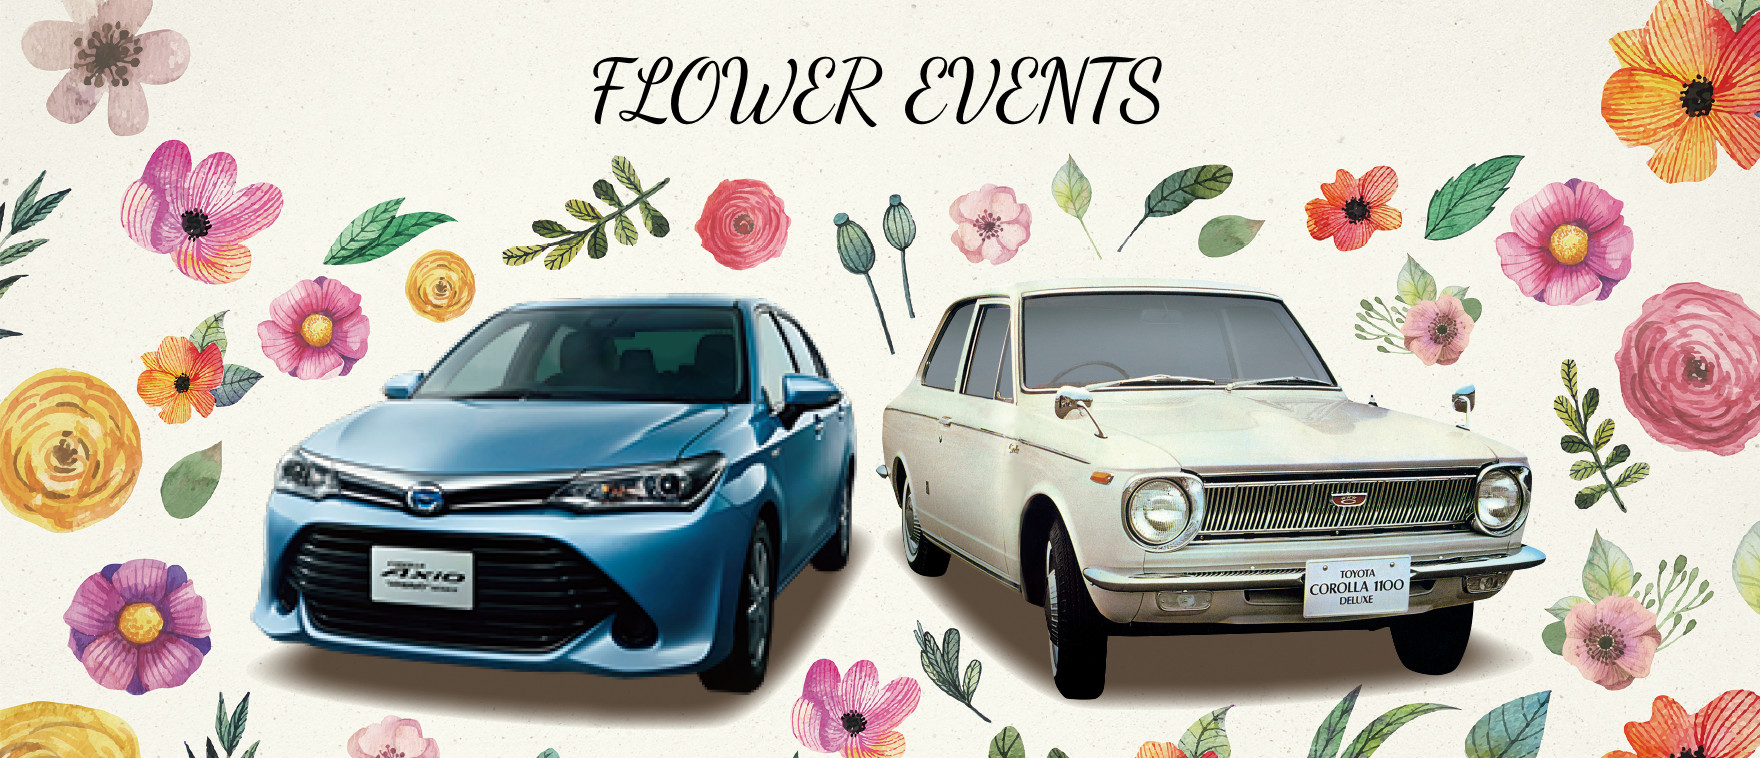 FLOWER EVENTS